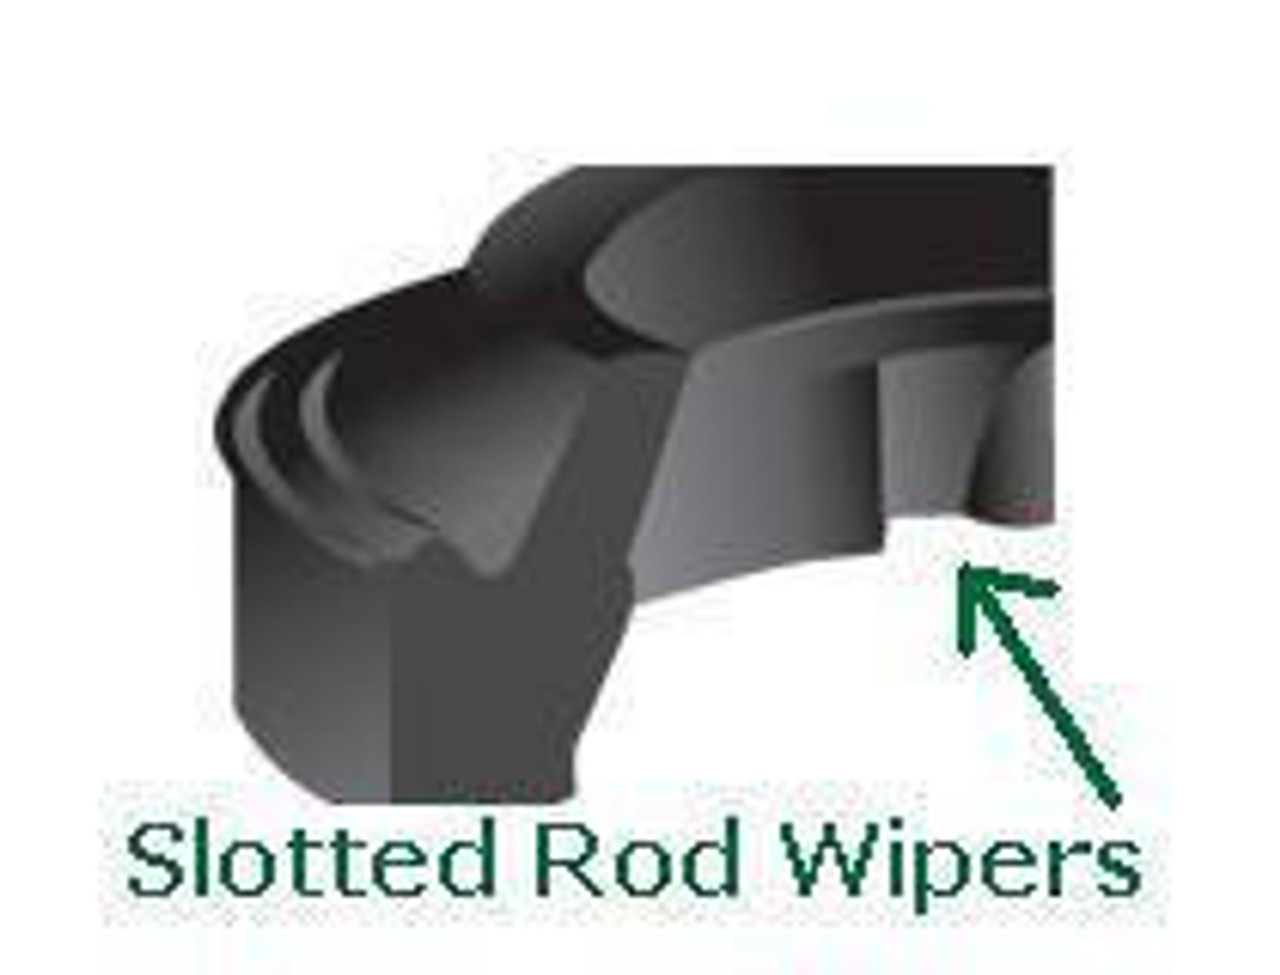 Rod Wipers Slotted for 7/8" Price for 1 pc